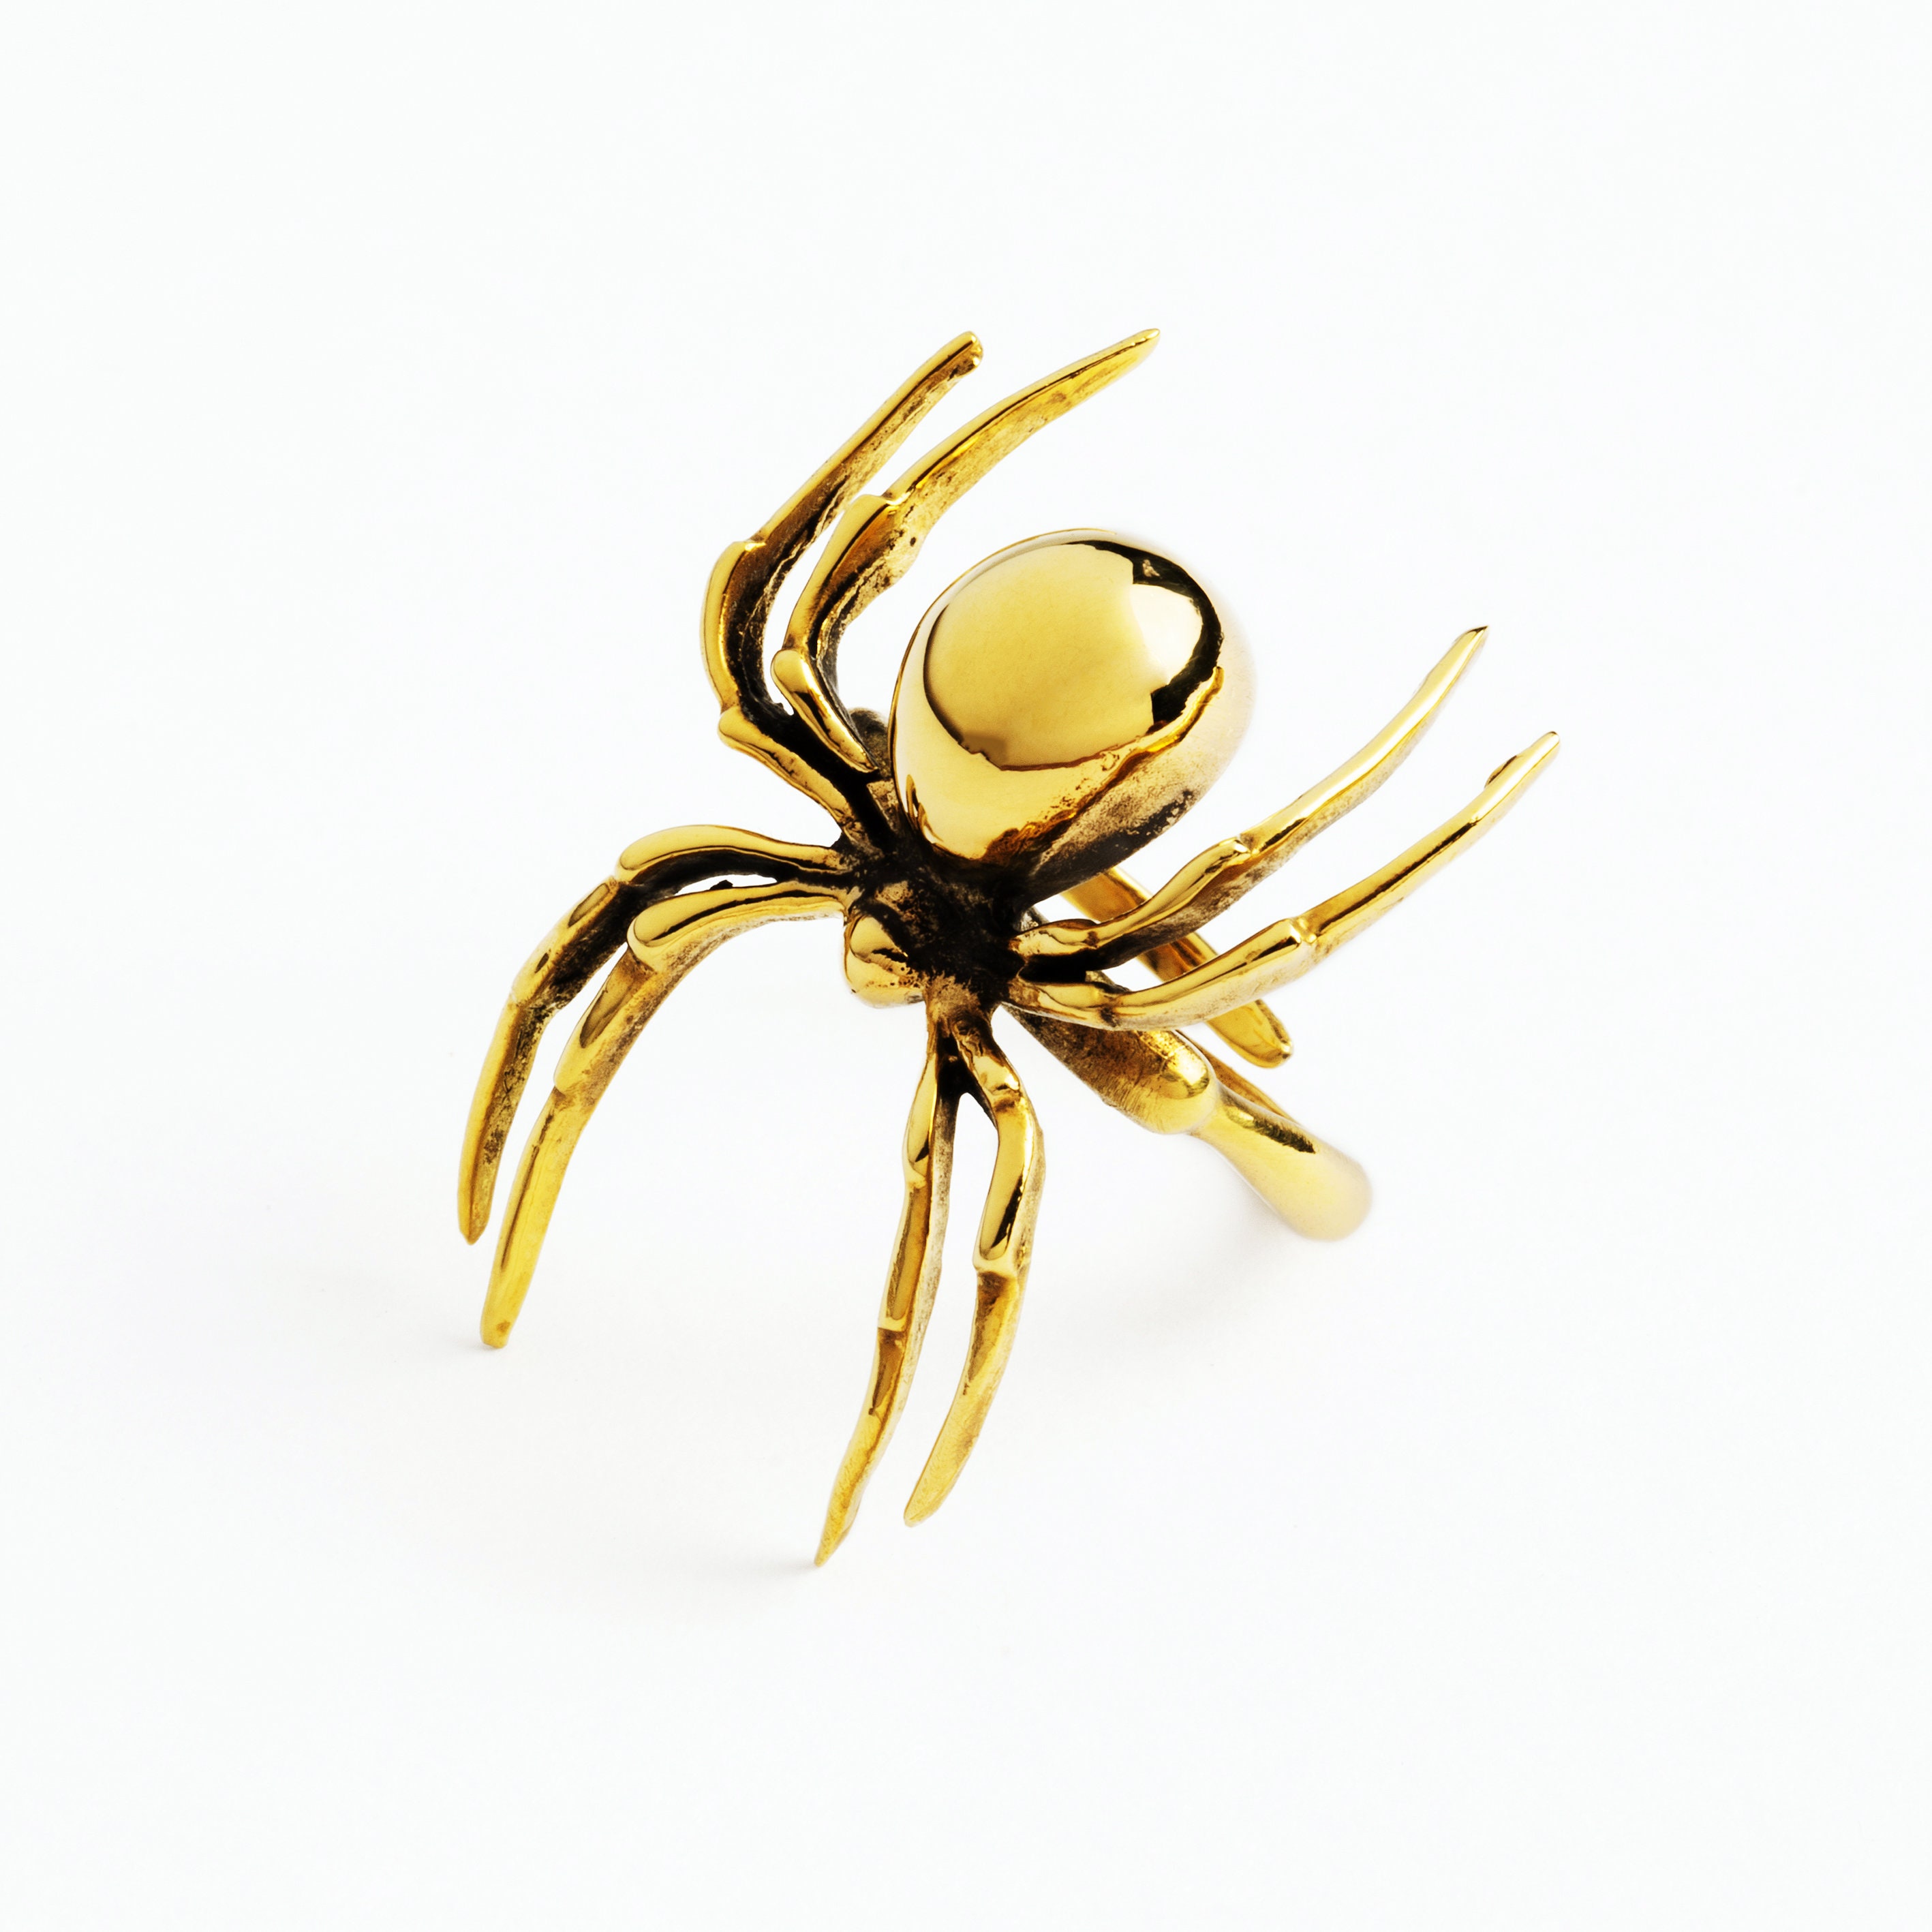 Animal Ring Unique Spider jewelry Gothic Ring Adjustable Ring Wiccan Jewelry Gothic Jewellery Black Widow Silver Bronze Spider Ring